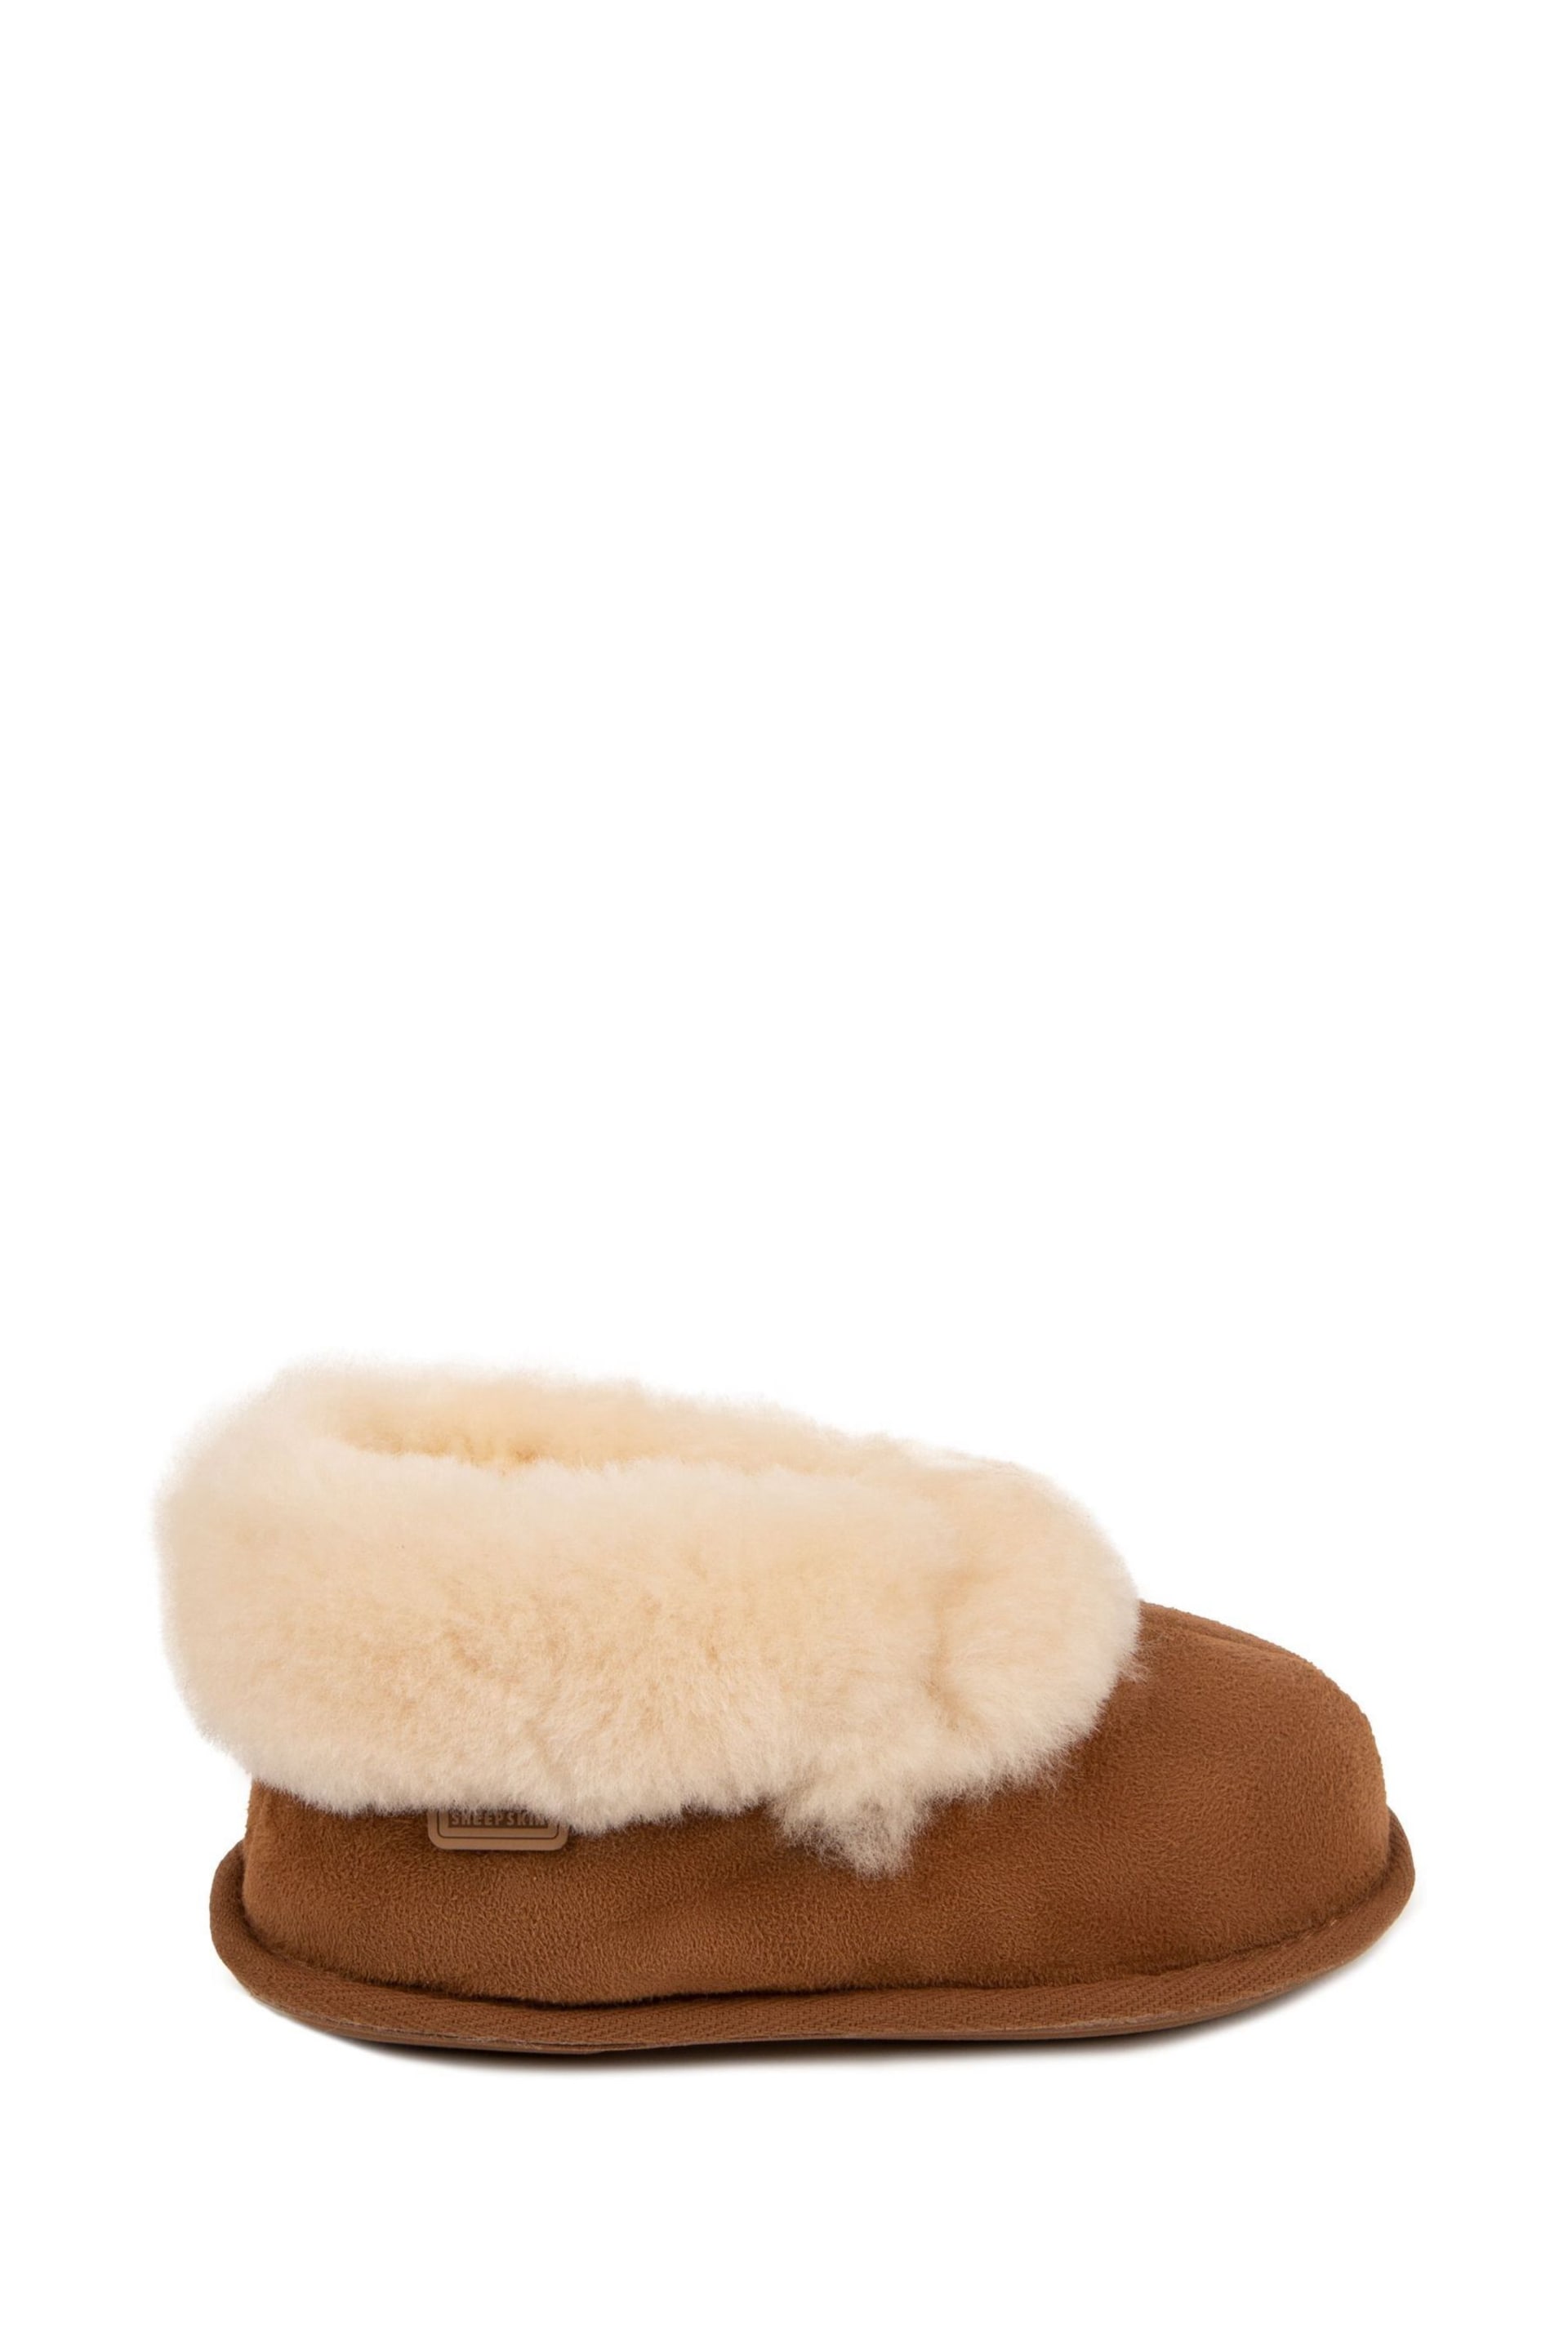 Just Sheepskin™ Brown Childrens Classic Slippers - Image 2 of 5